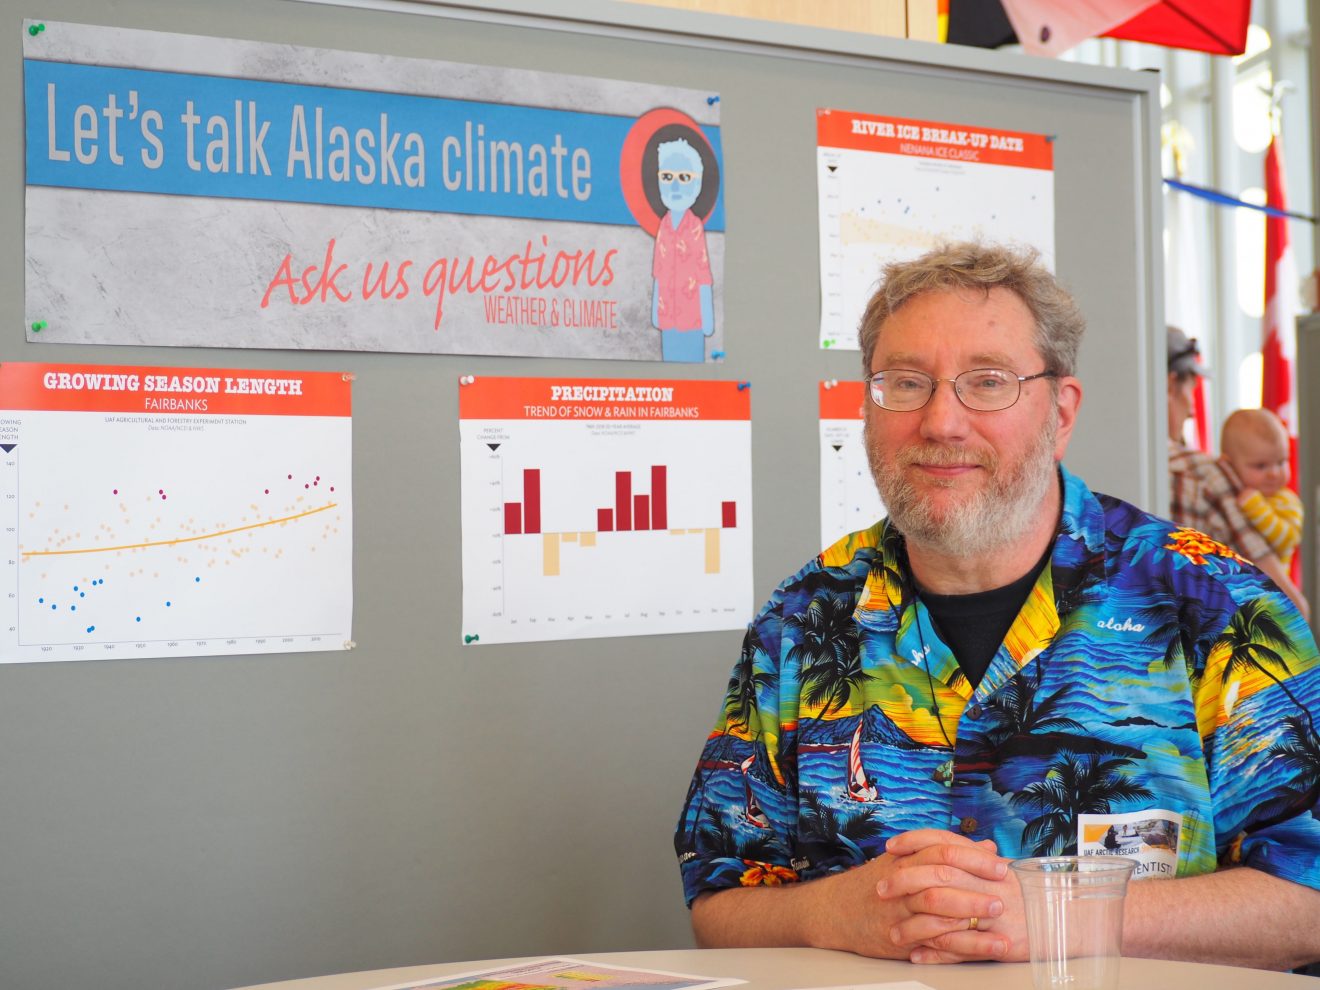 Photo of Rick Thoman sitting in front of a board with a sign inviting people to ask questions about Alaska climate.